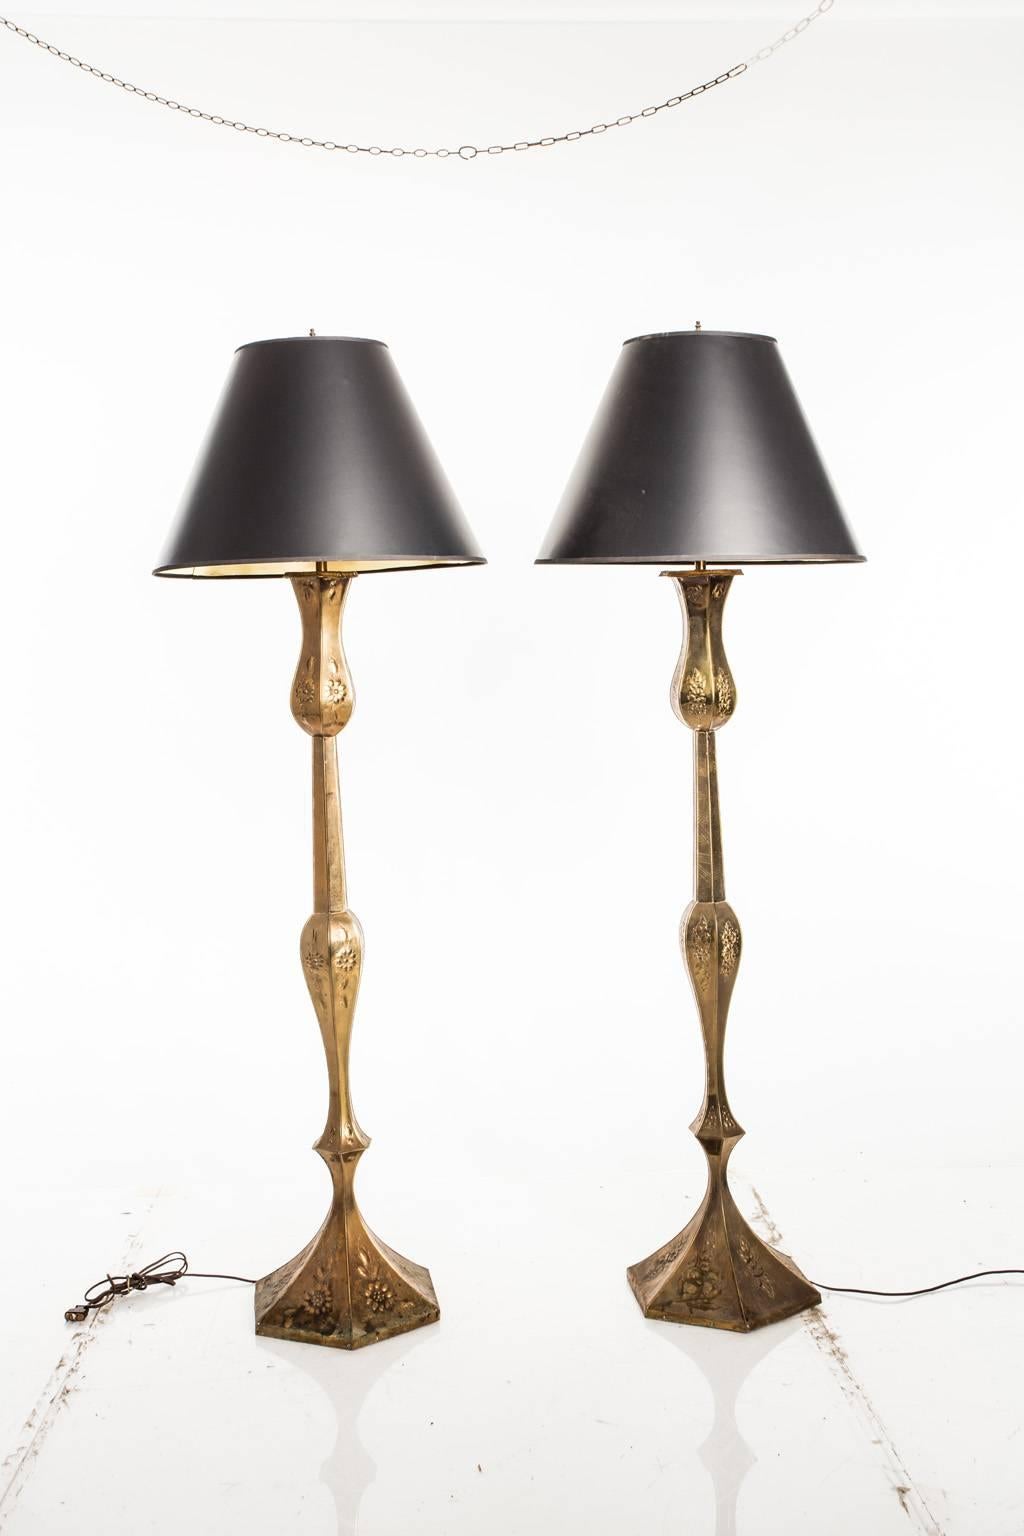 Pair of tall brass floor lamps with repoussé floral motifs throughout.